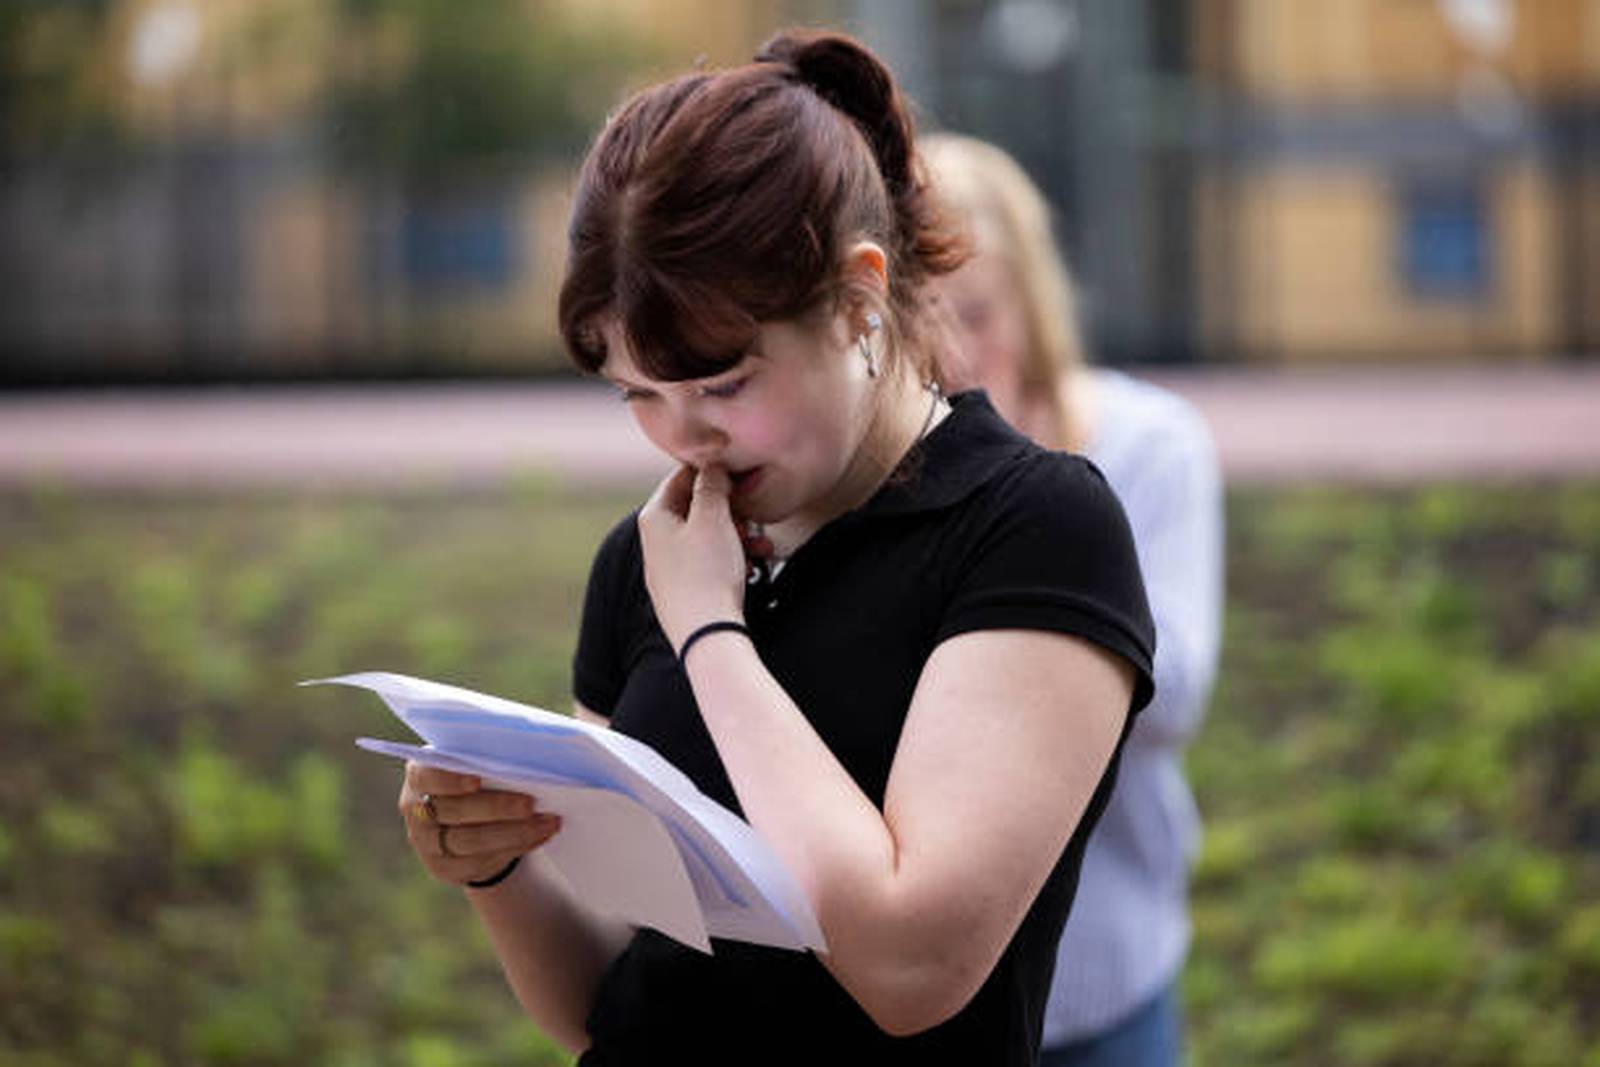 Fewer Top Gcse Grades Predicted As Pupils Return To Exams 8090